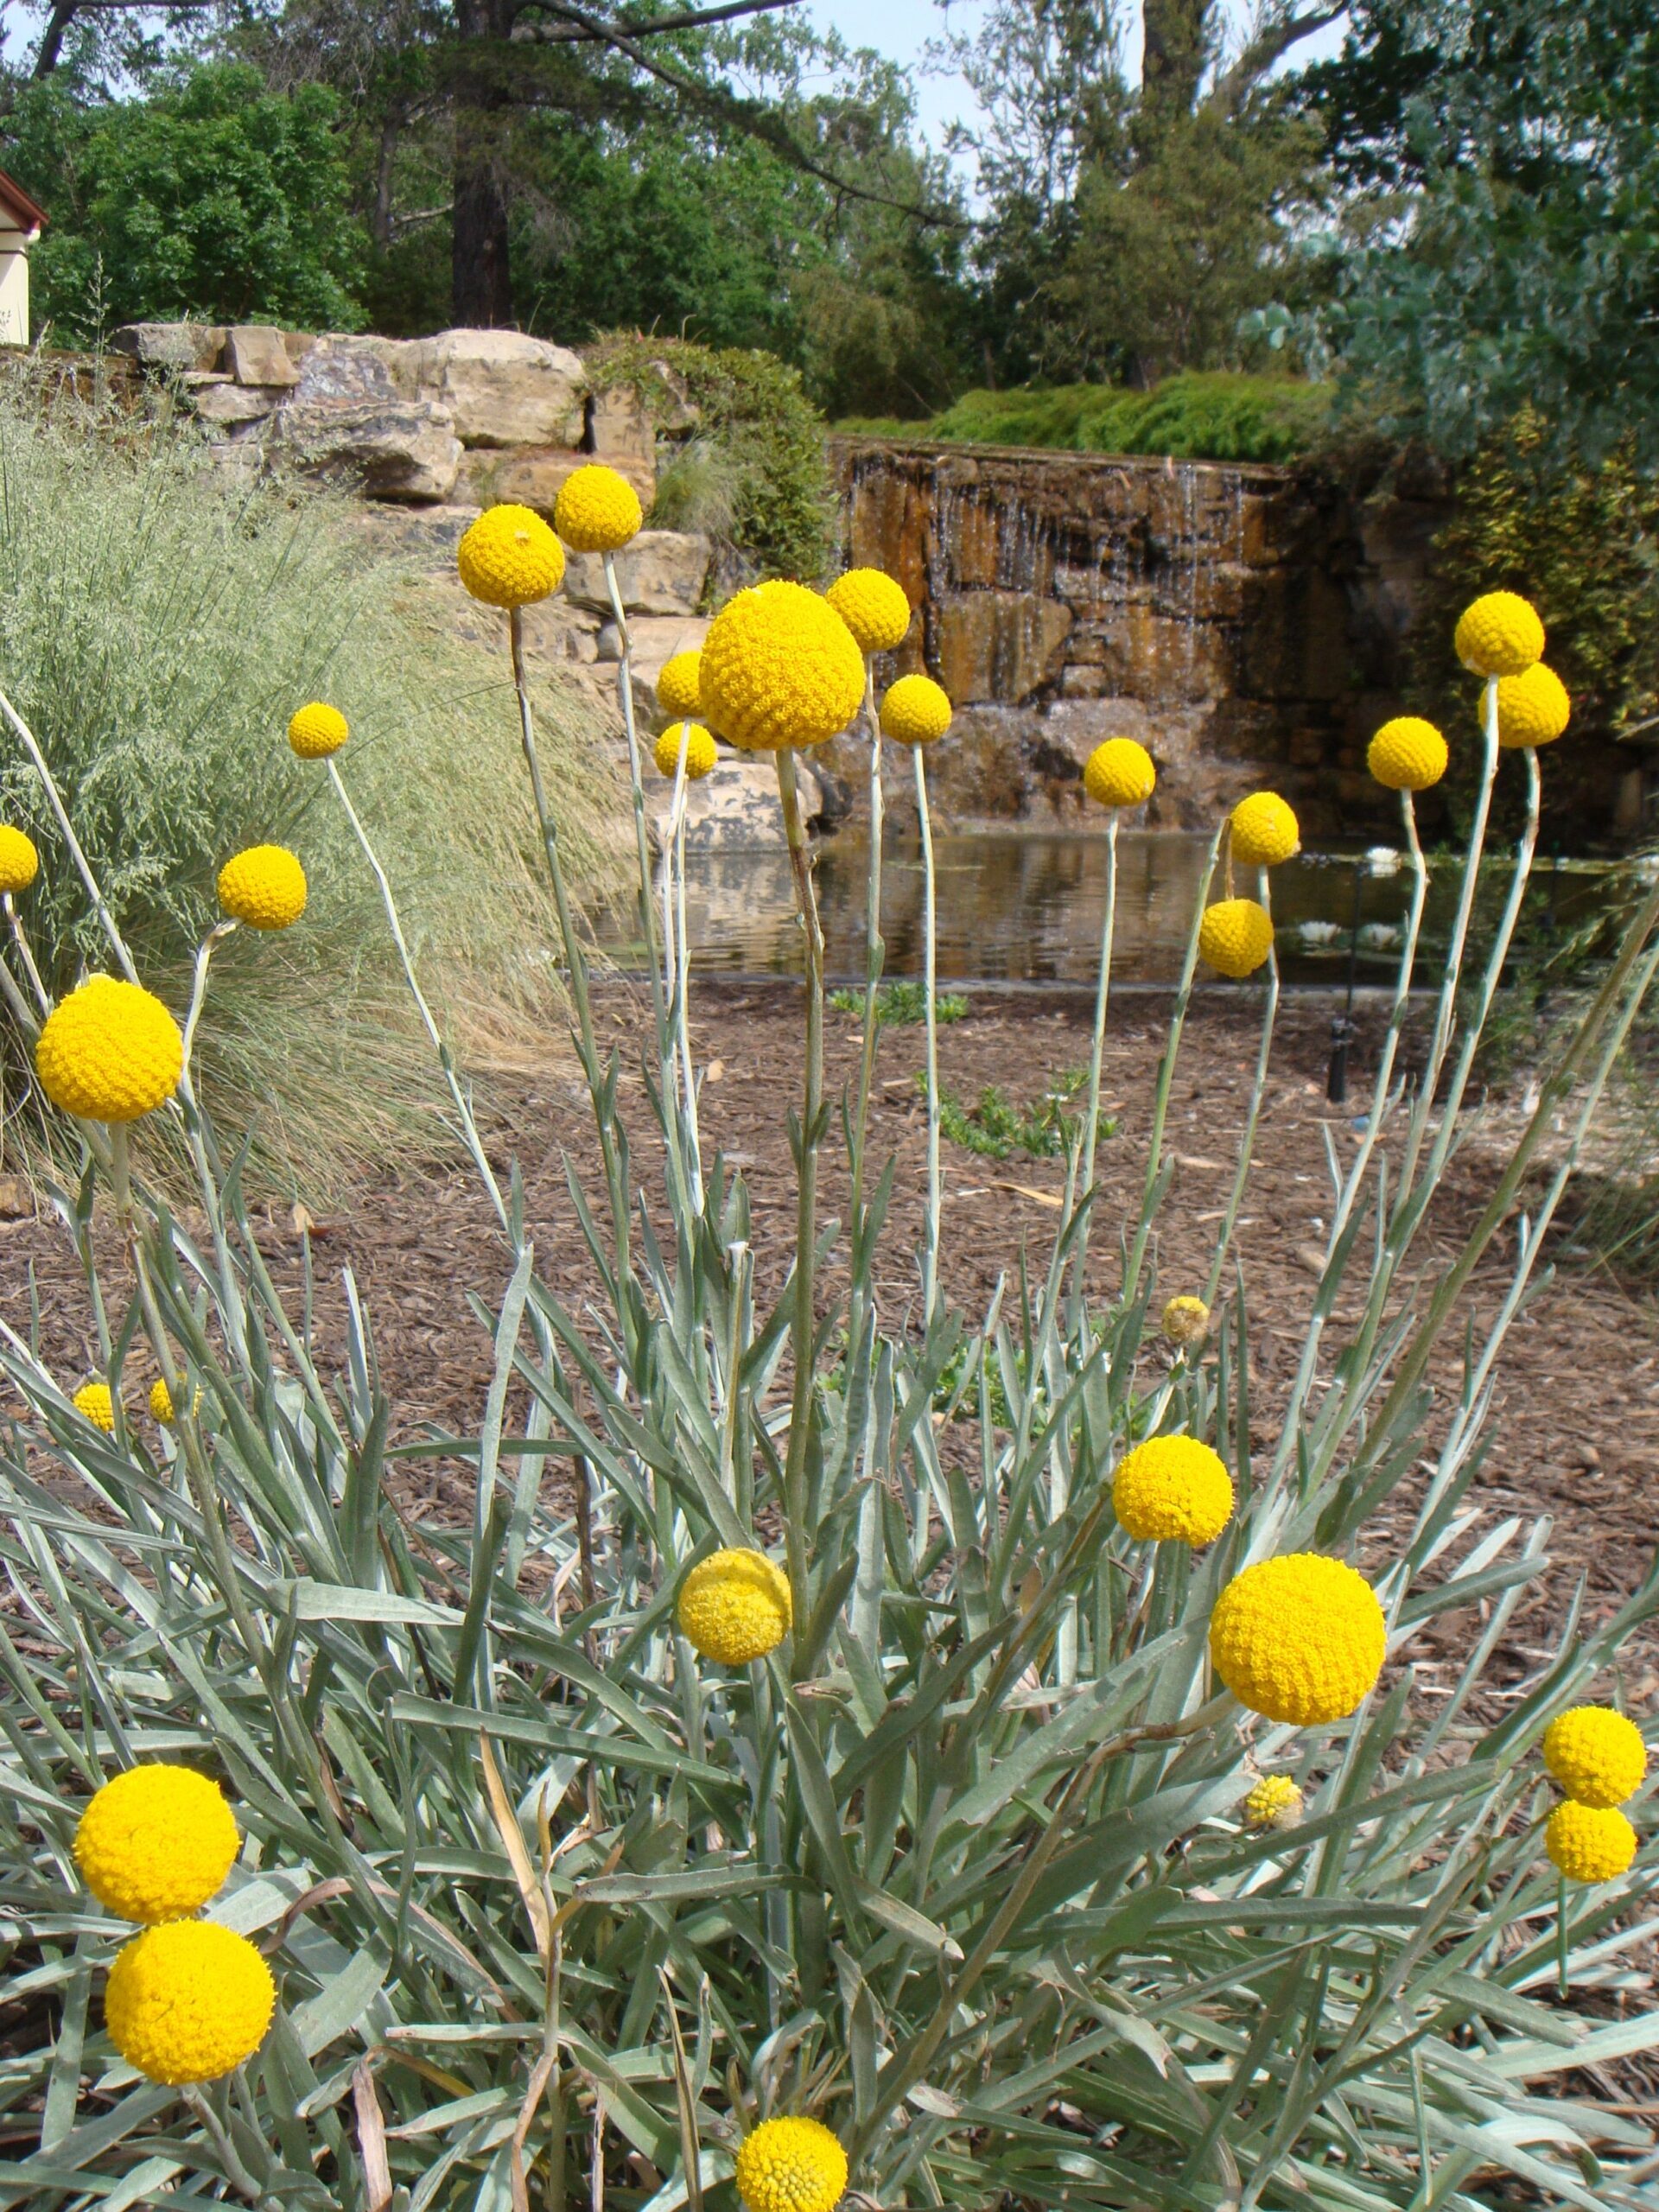 billy buttons, bring natural beauty as offered by Gardengreen